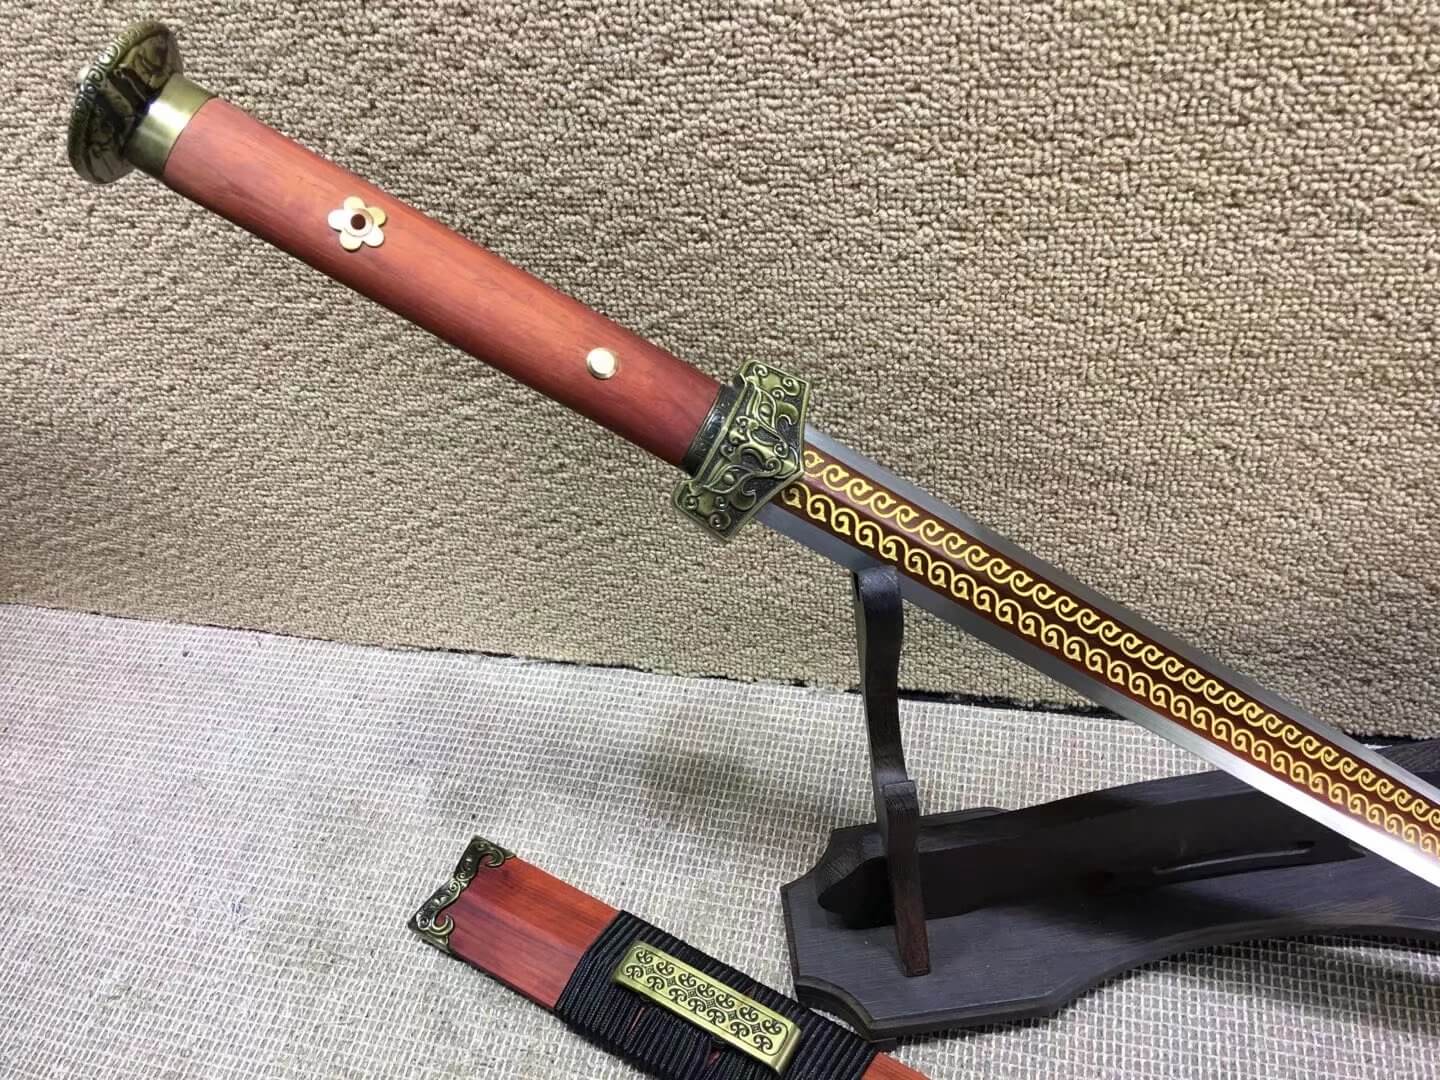 Han jian,High carbon steel,Red scabbard,Alloy fittings,Full tang,Length 31" - Chinese sword shop